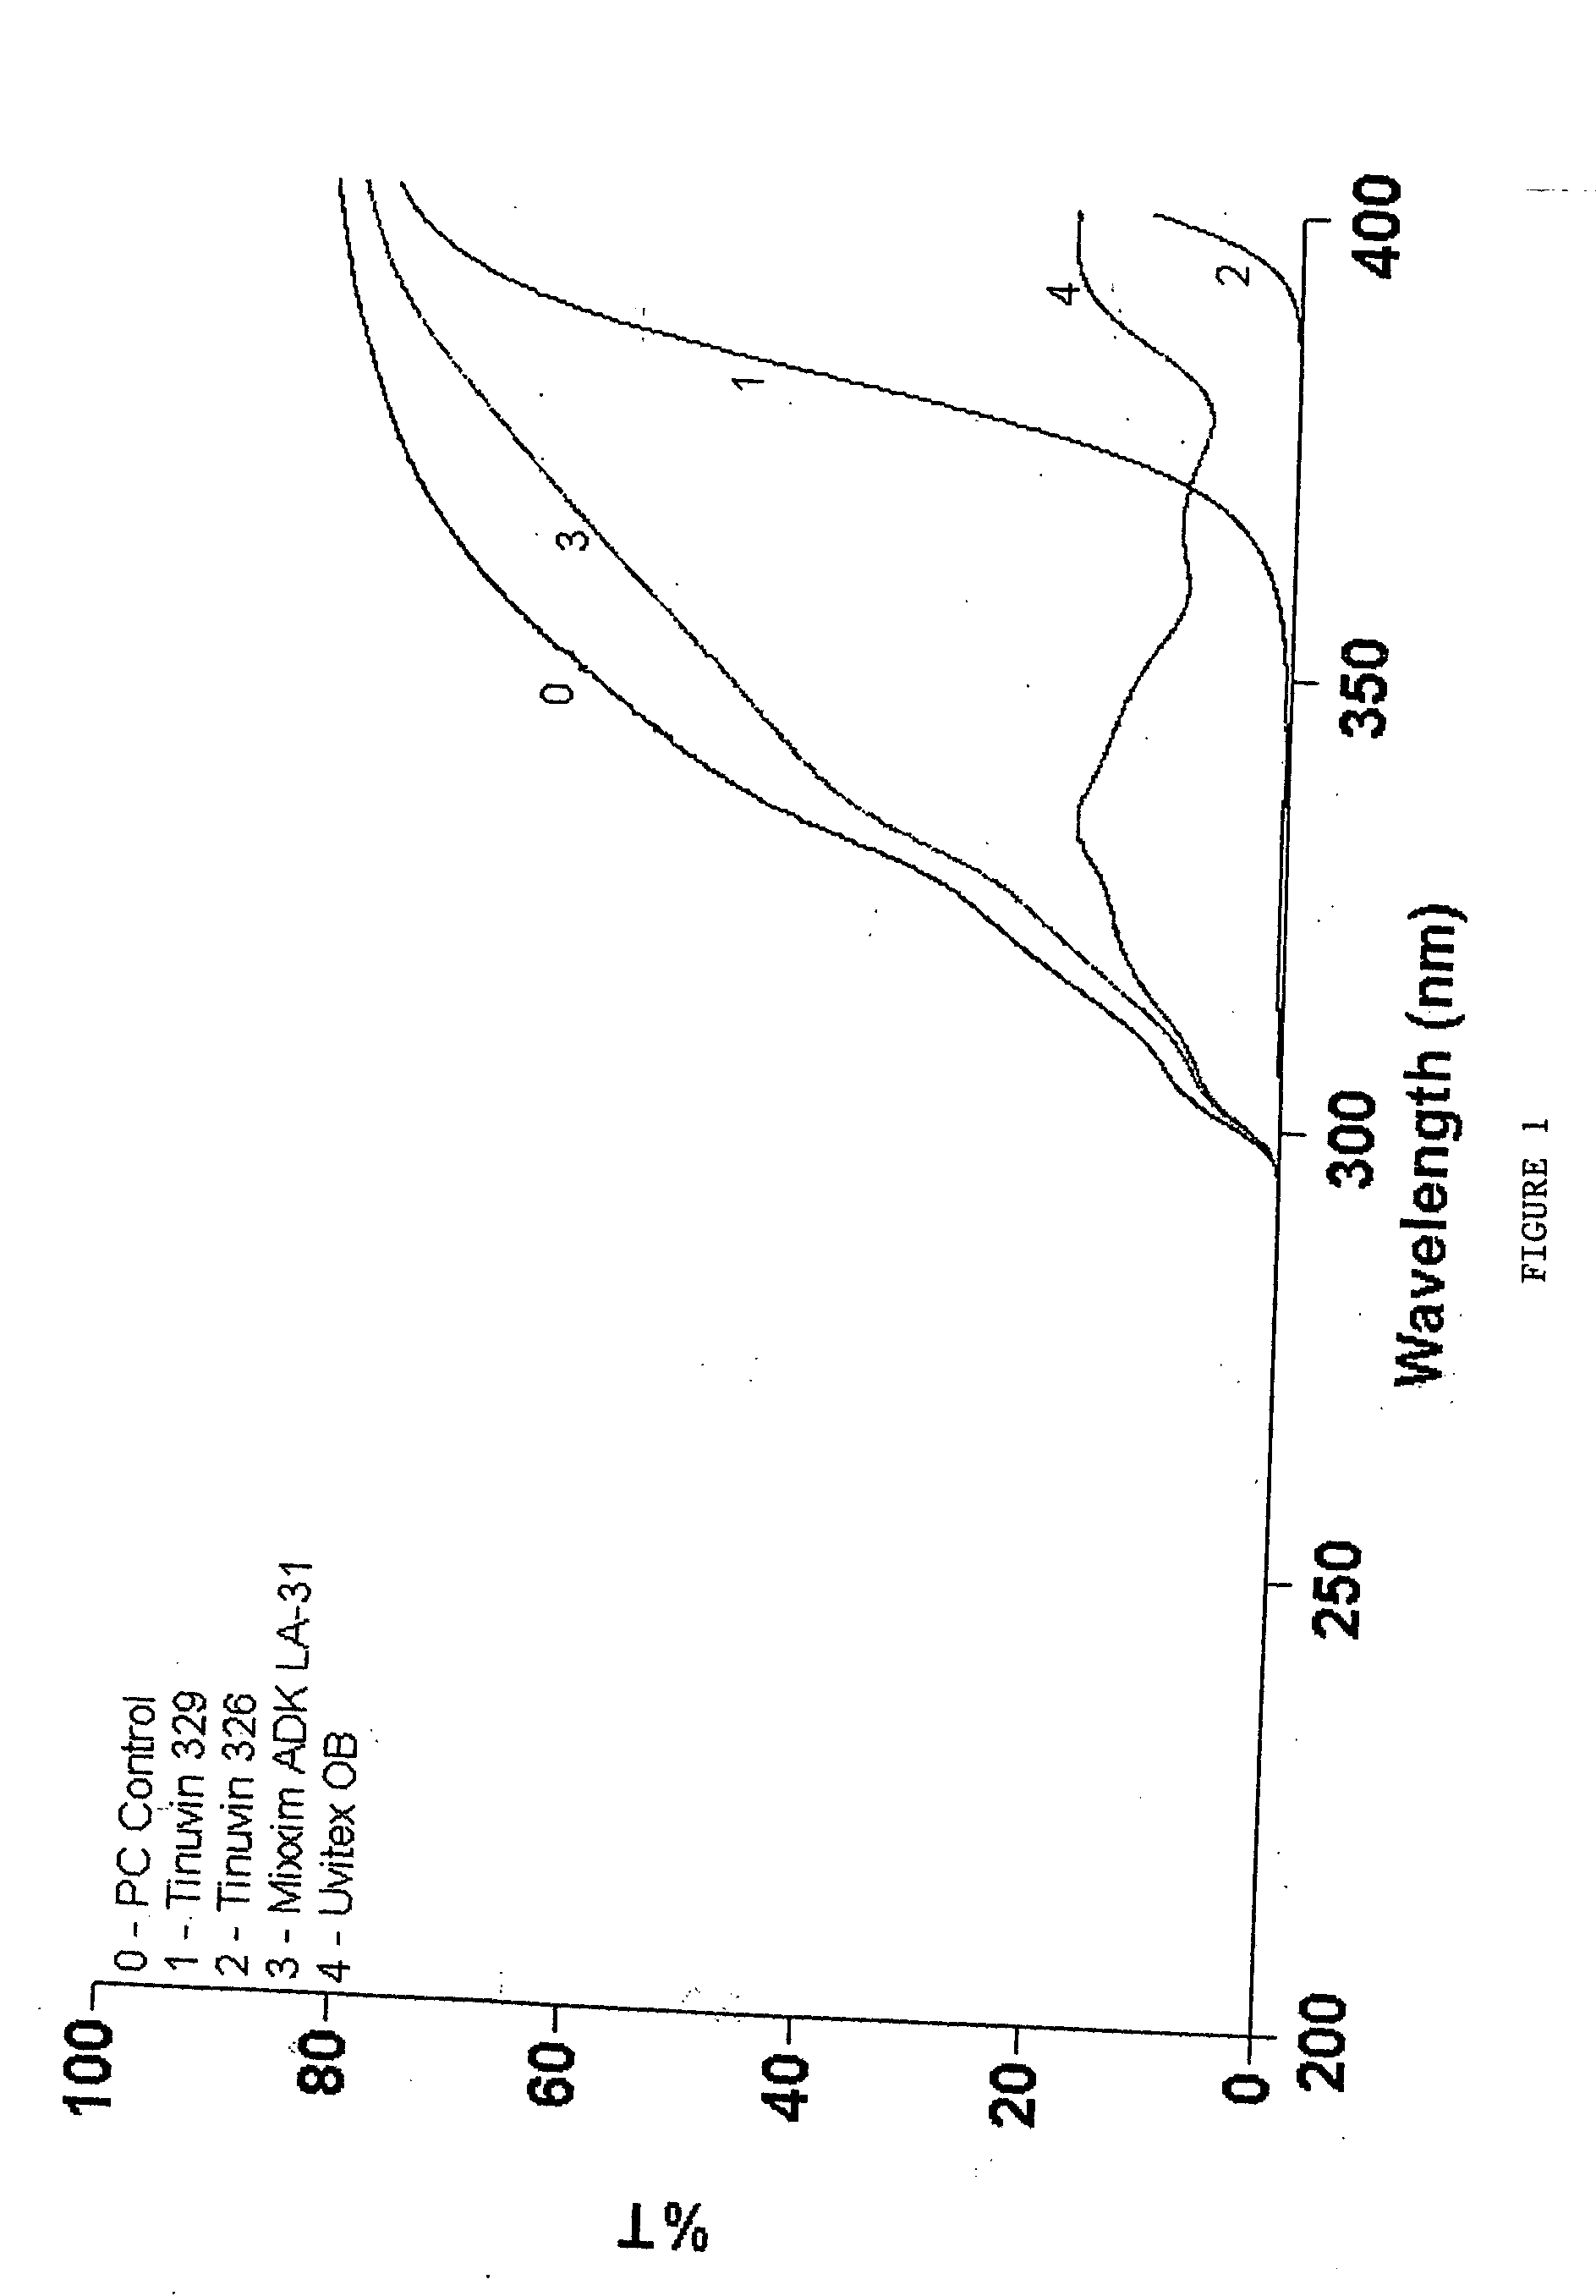 Method of treating a plastic article